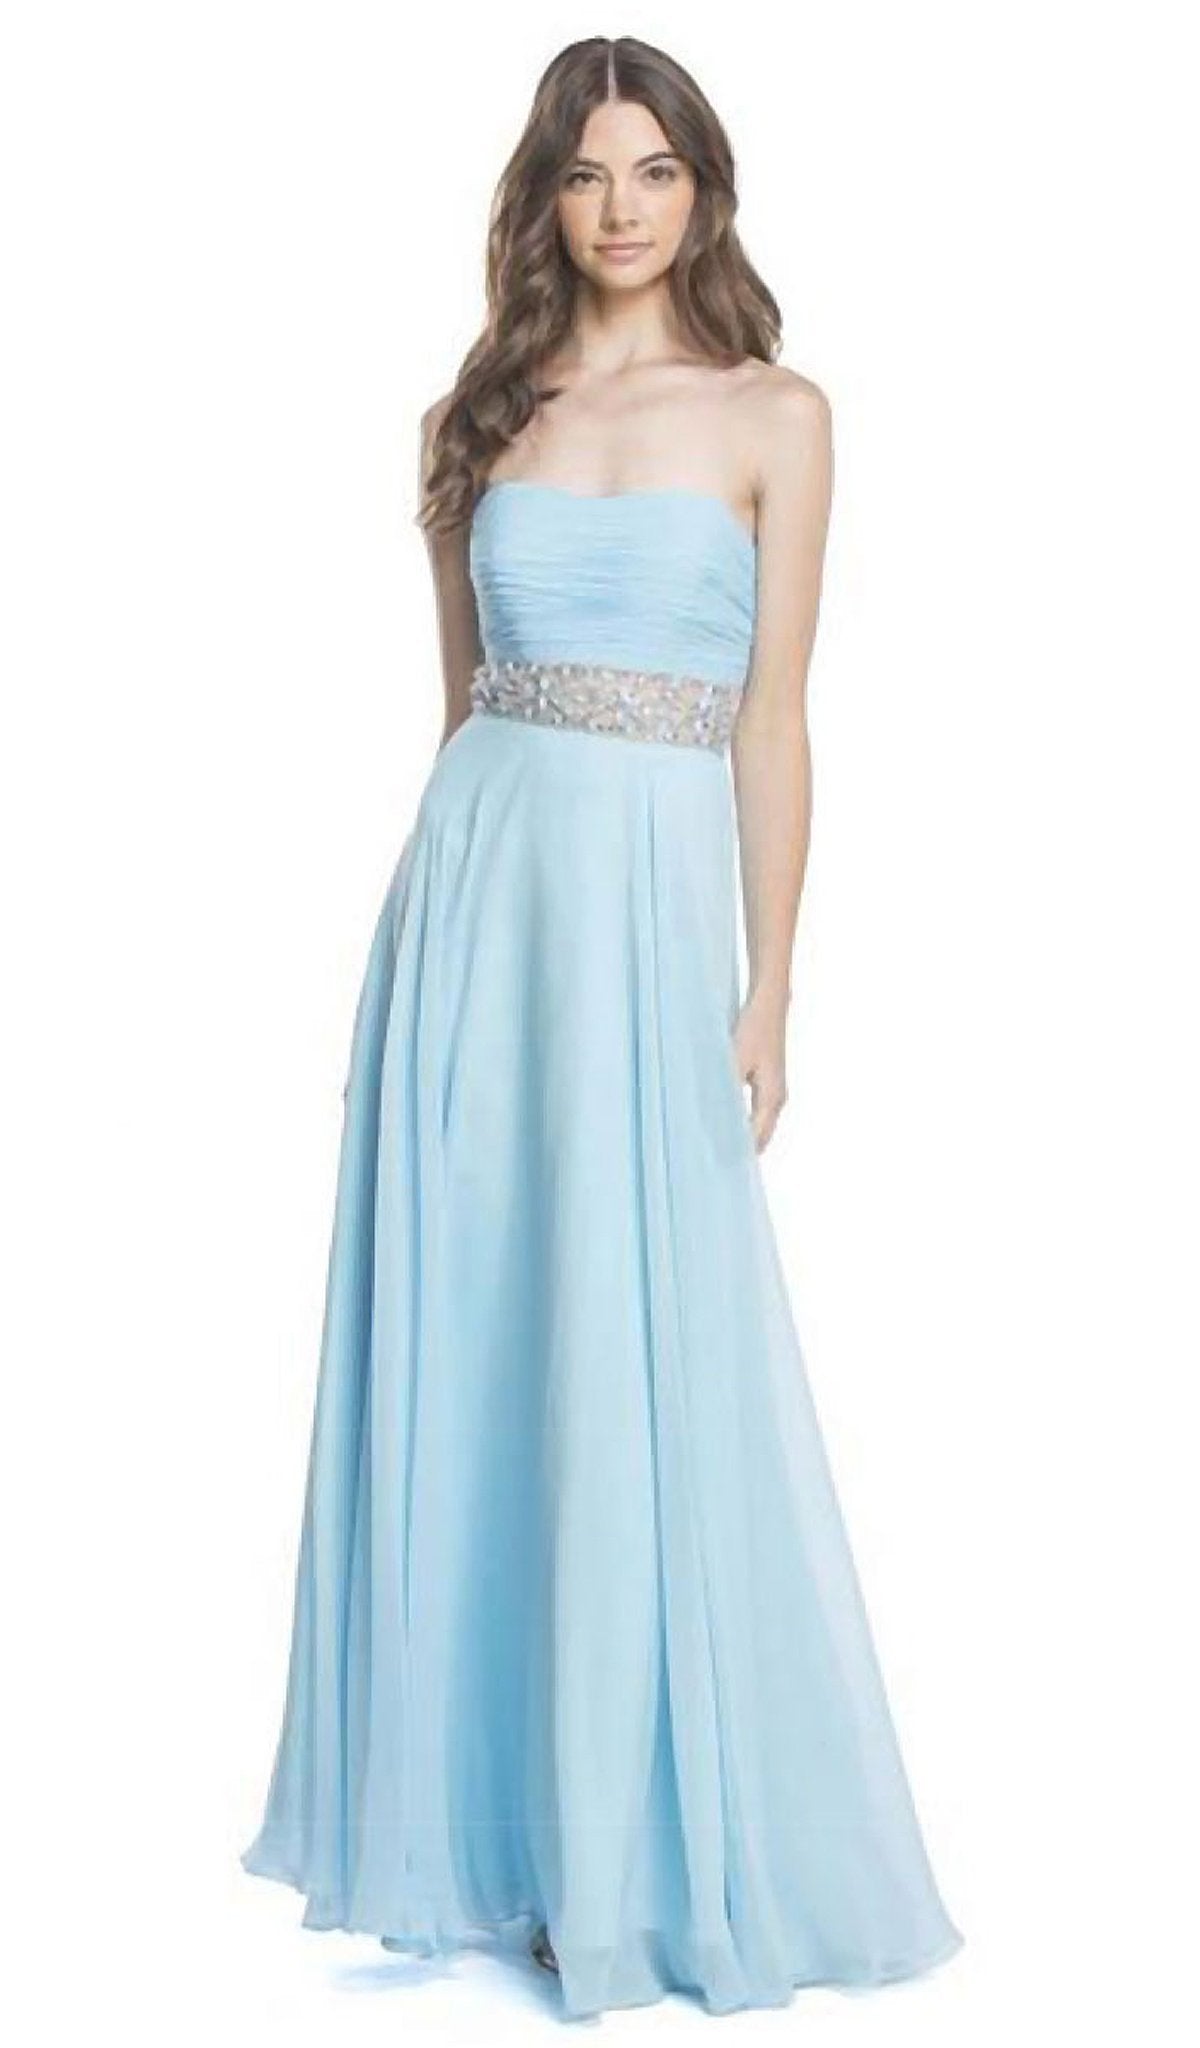 Image of Aspeed Design - Strapless Ruched Evening A-Line Dress